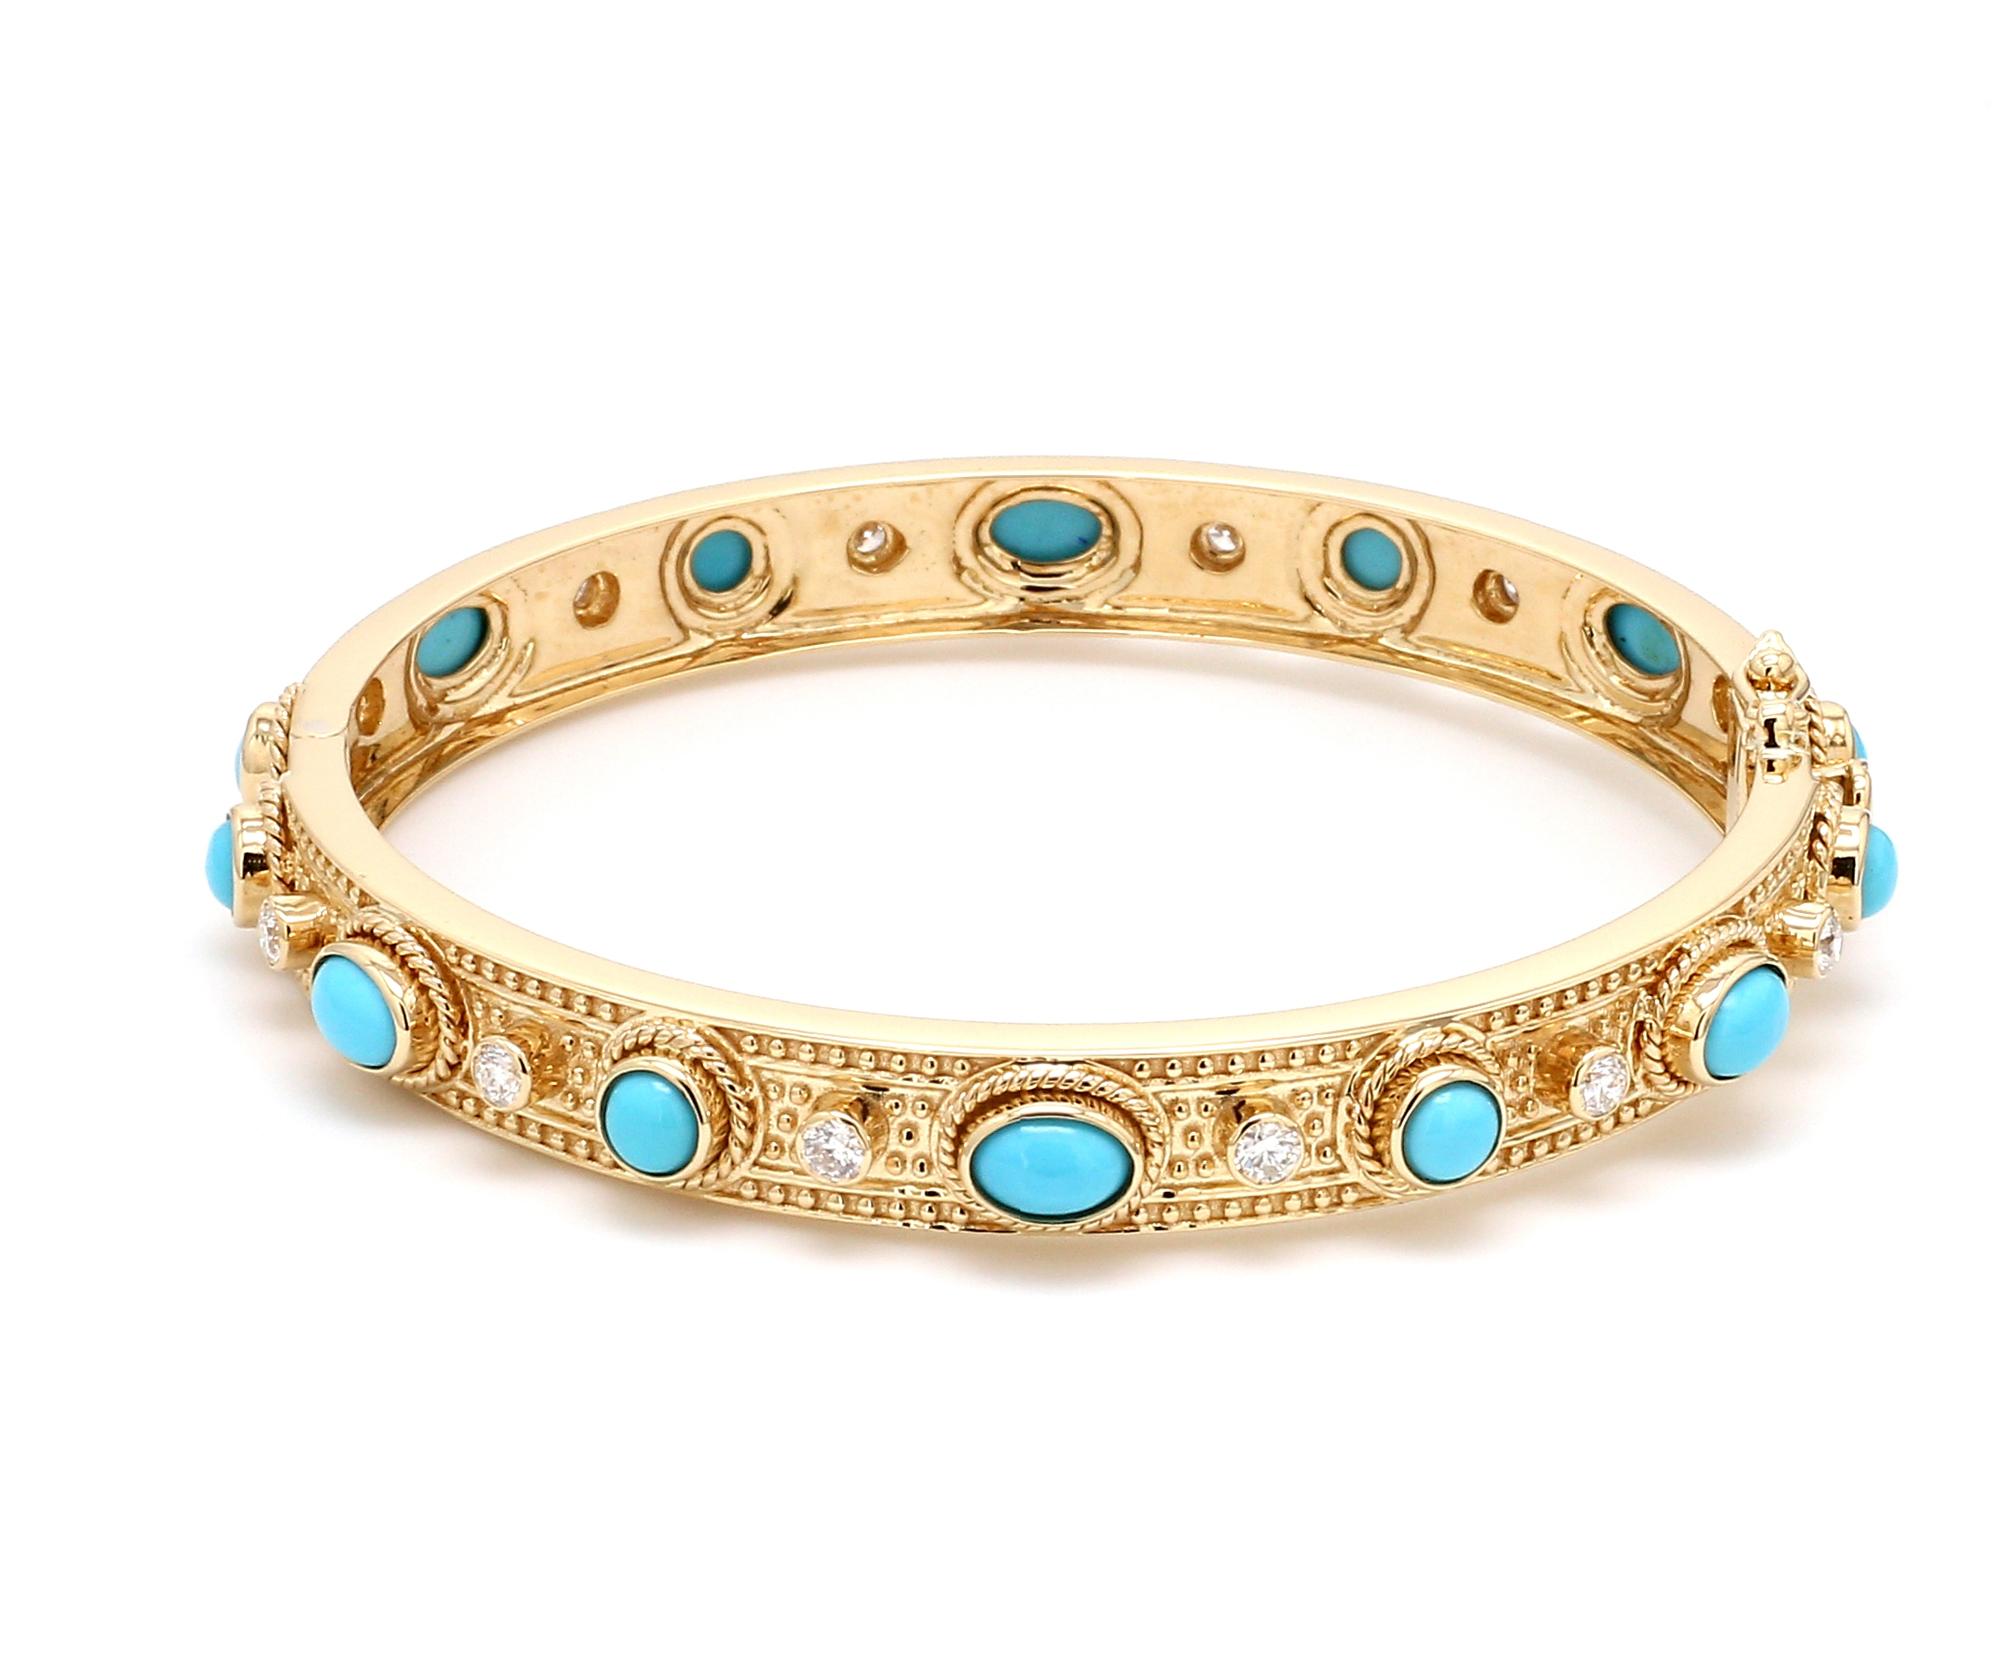 Item Code :- CN-25657
Gross Wt :- 24.63 gm
18k Yellow Gold Wt :- 23.53 gm
Diamond Wt :- 0.75 ct  ( AVERAGE DIAMOND CLARITY SI1-SI2 & COLOR H-I )
Turquoise Wt :- 4.75 ct
Bangle Size :- 62.93 x 64.22 x 8 mm

✦ Sizing
.....................
We can